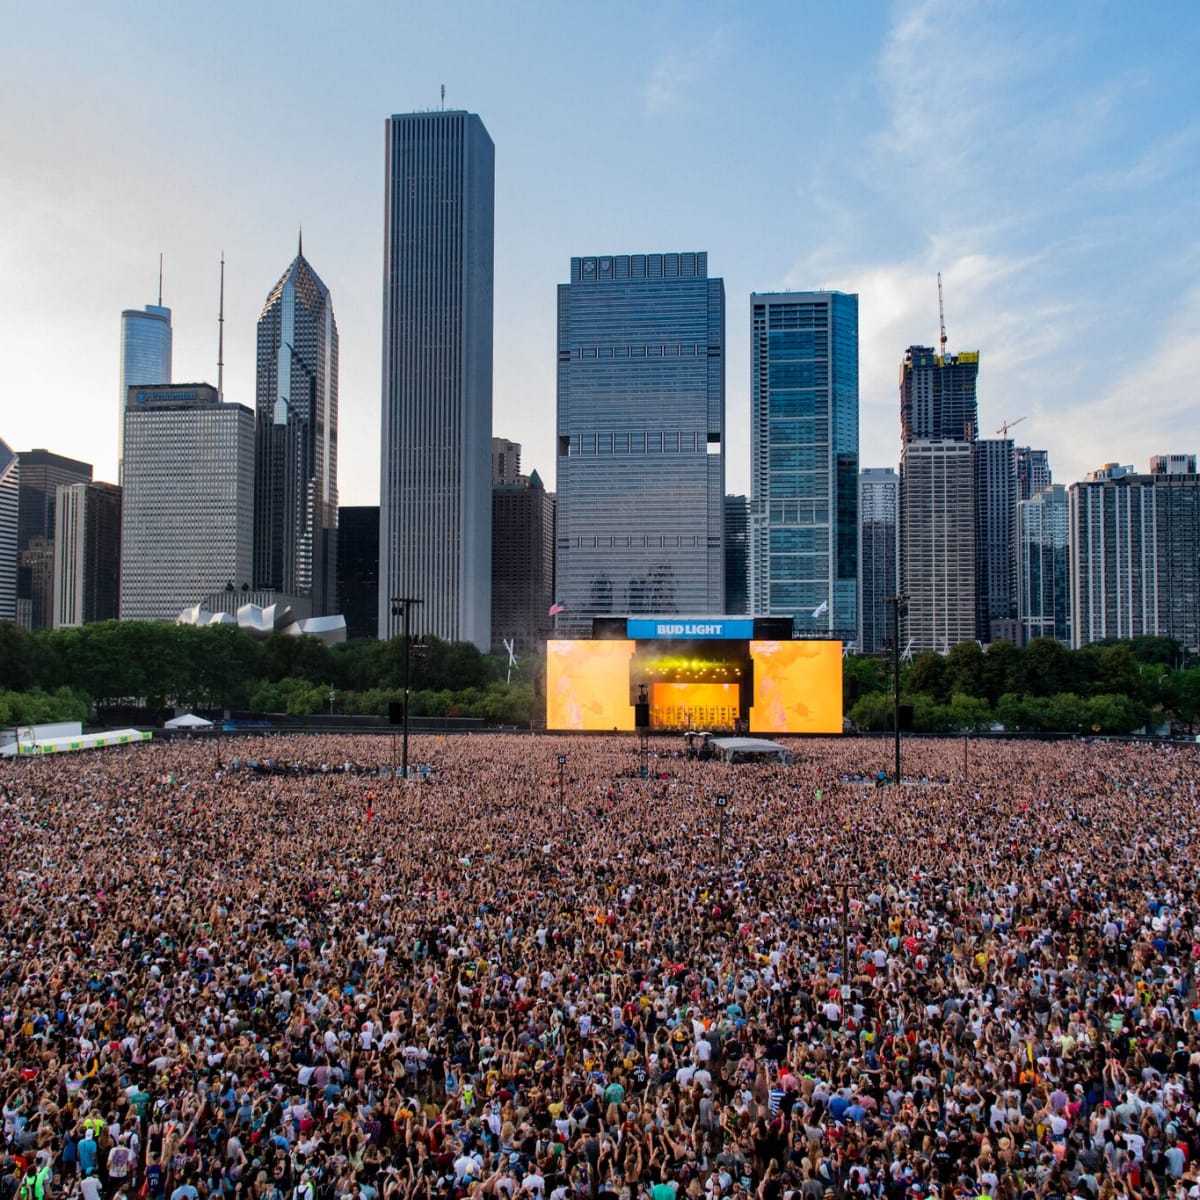 Lightfoot announces deal to keep Lollapalooza in Chicago through